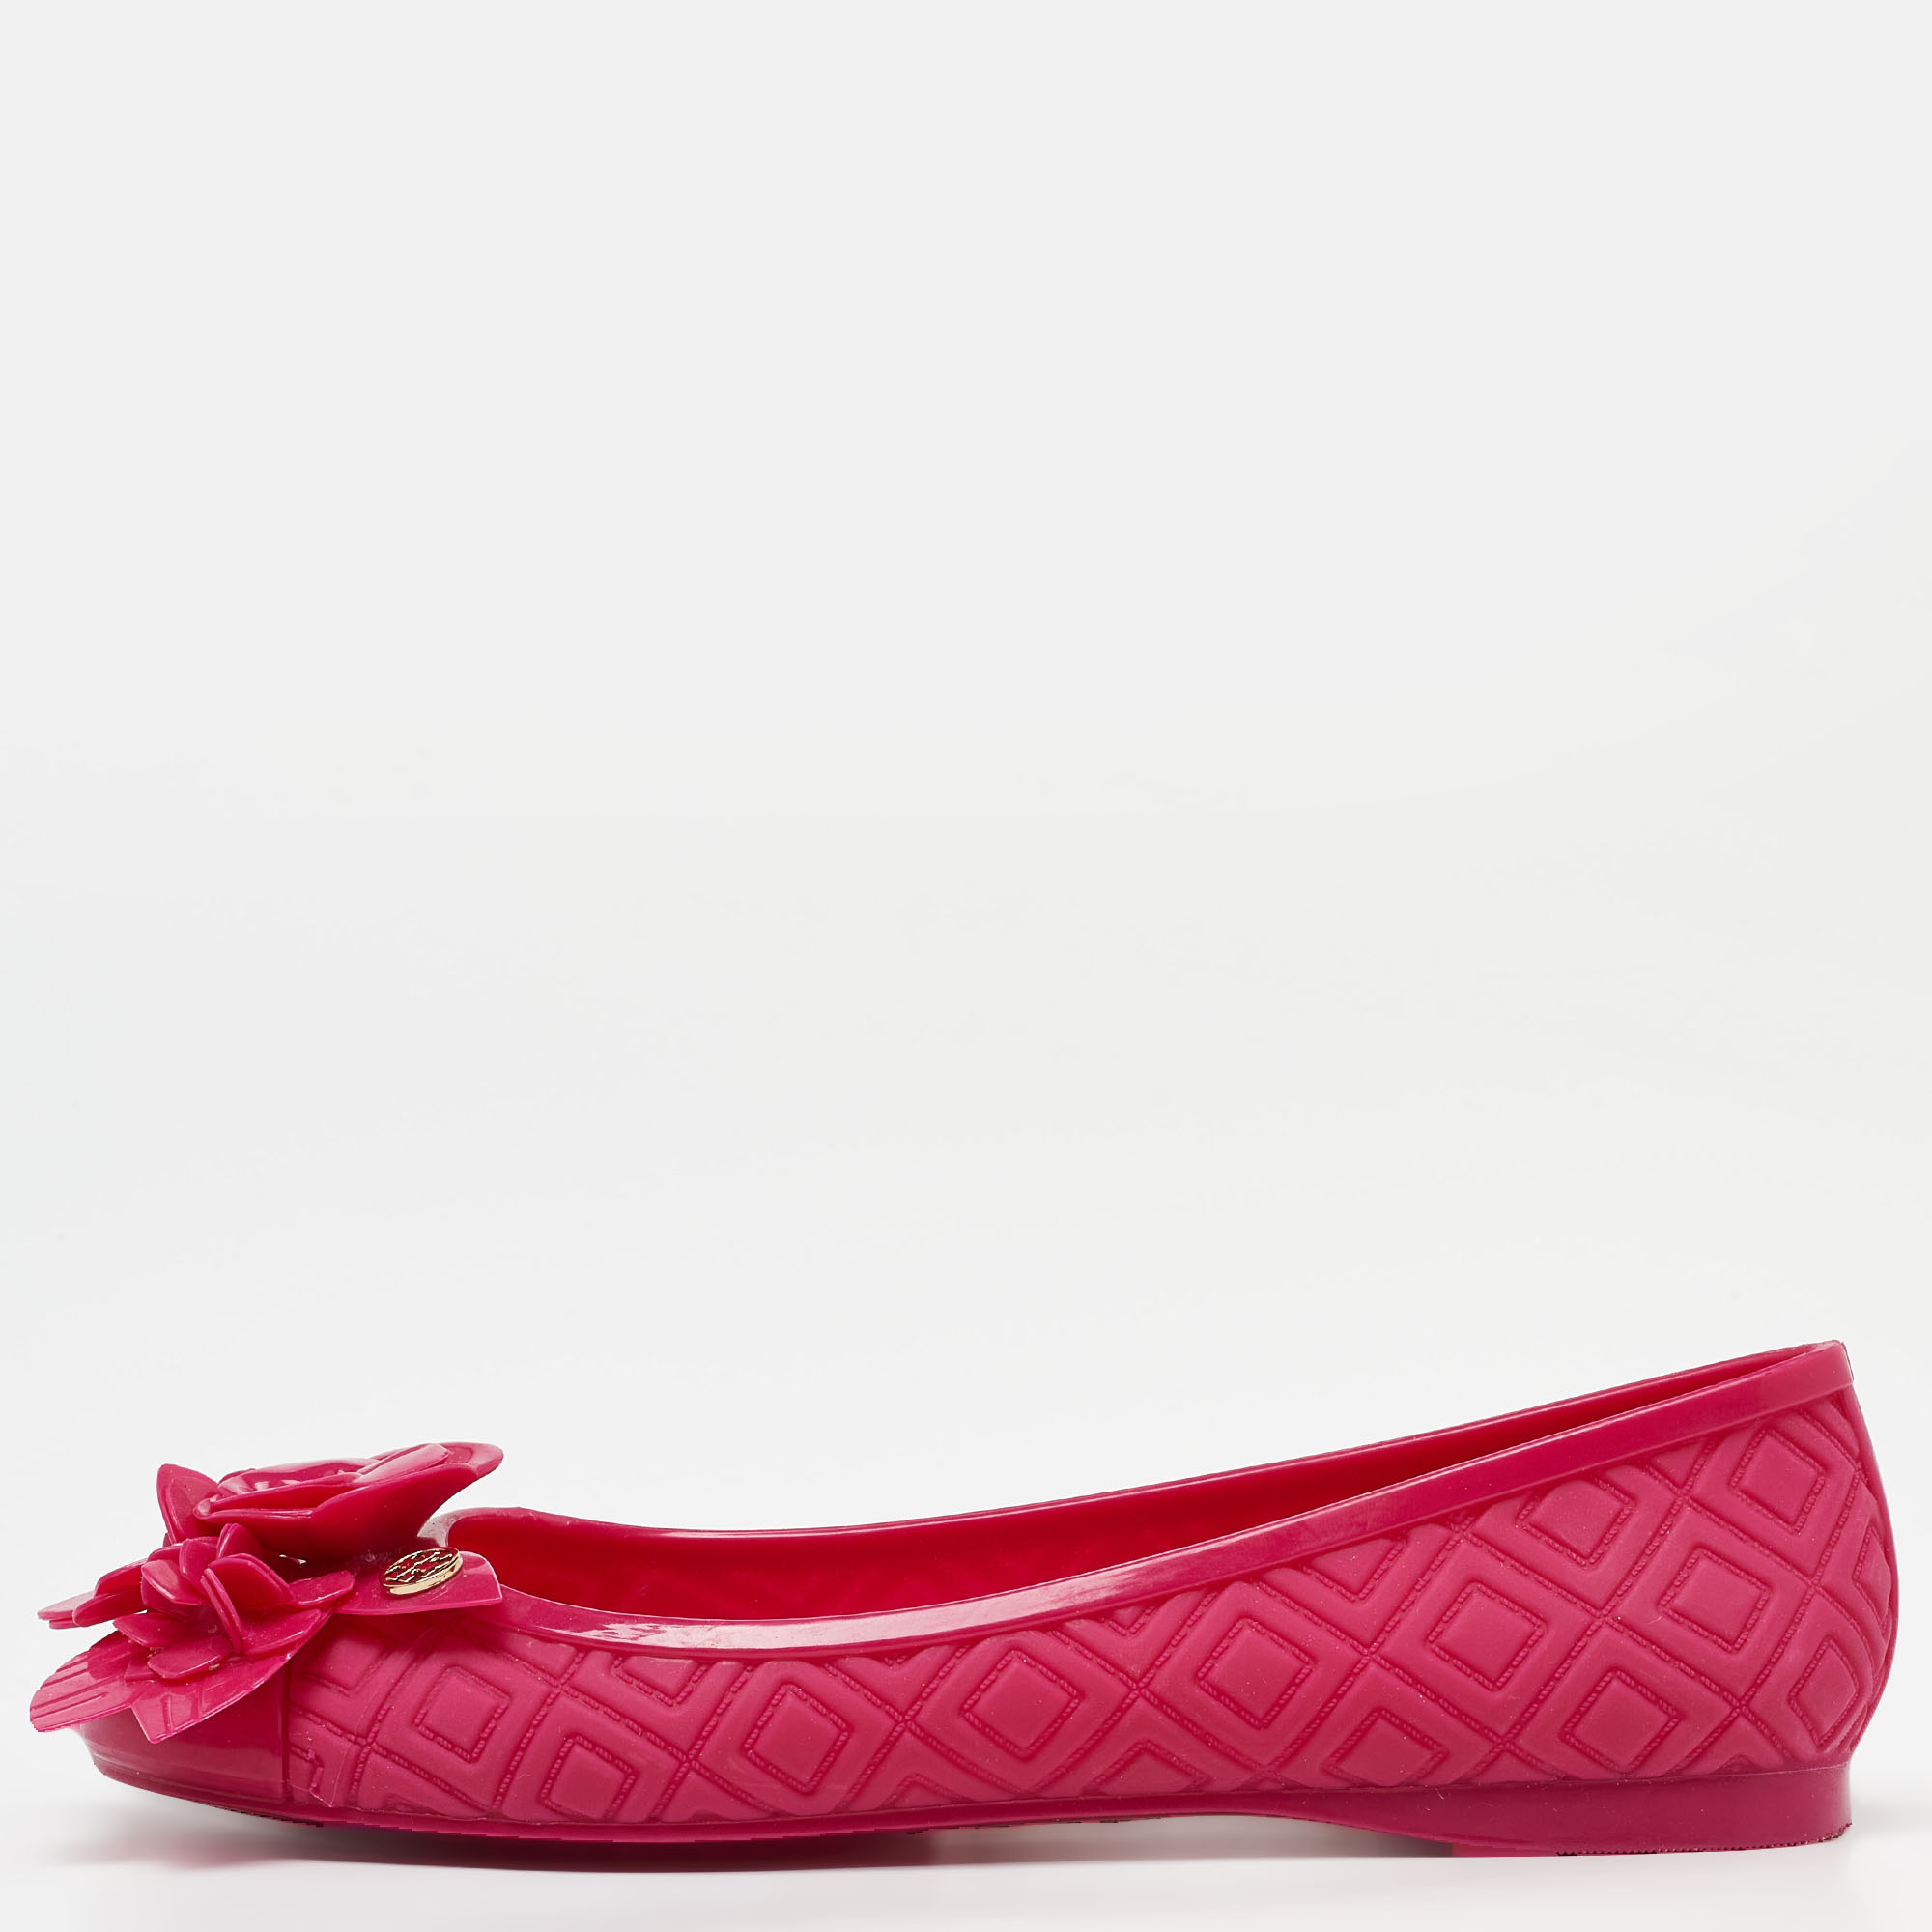 Tory burch red rubber bow ballet flats size 35